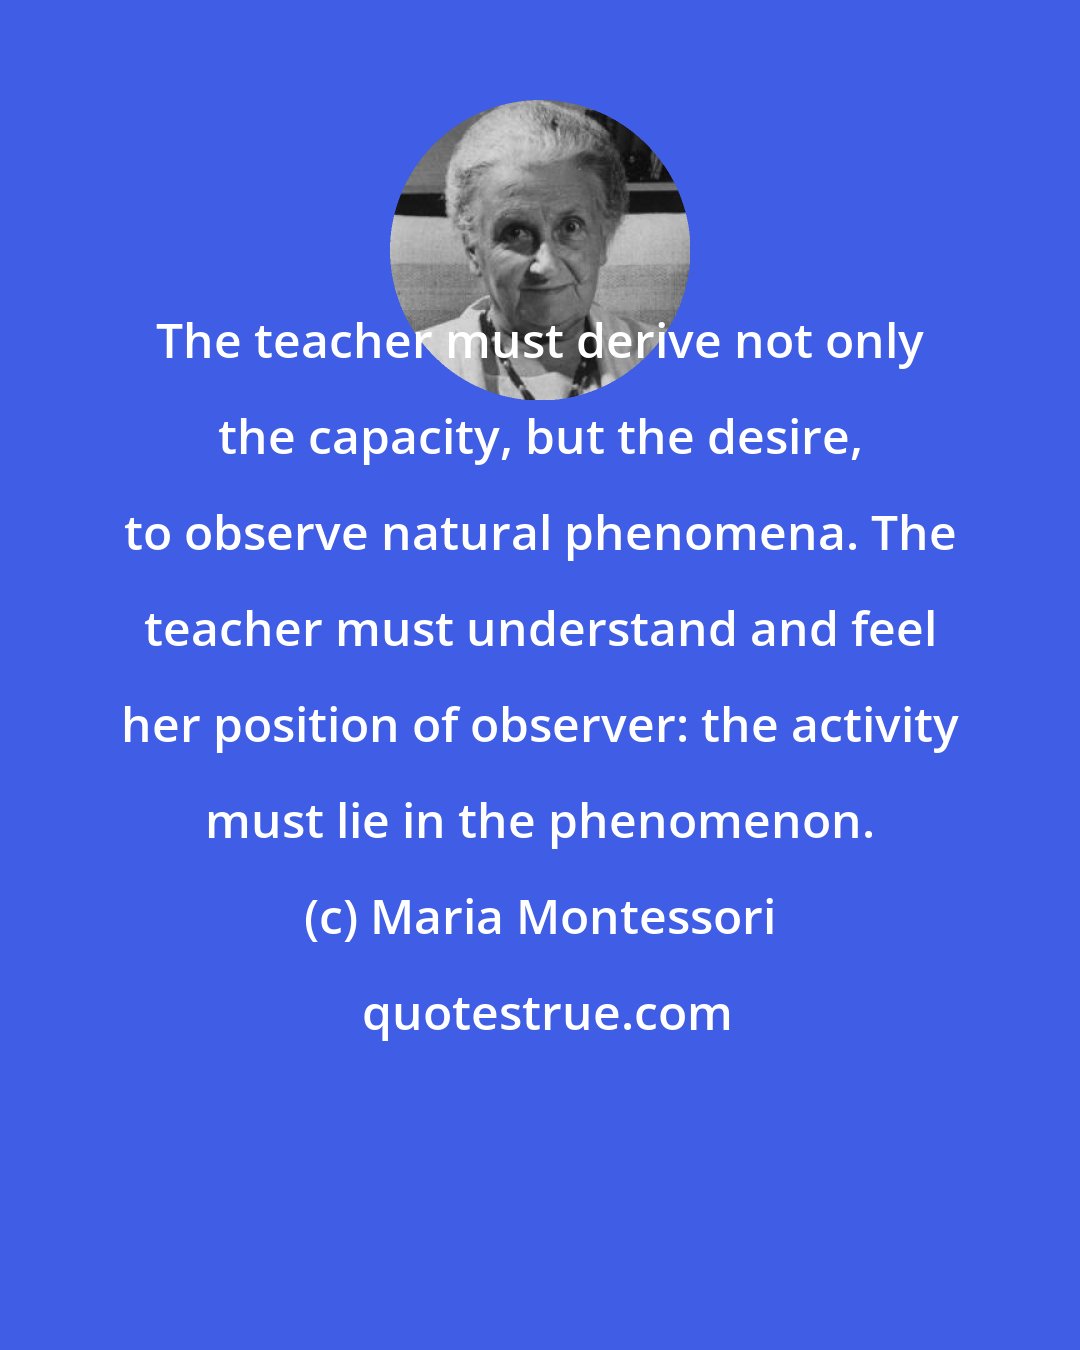 Maria Montessori: The teacher must derive not only the capacity, but the desire, to observe natural phenomena. The teacher must understand and feel her position of observer: the activity must lie in the phenomenon.